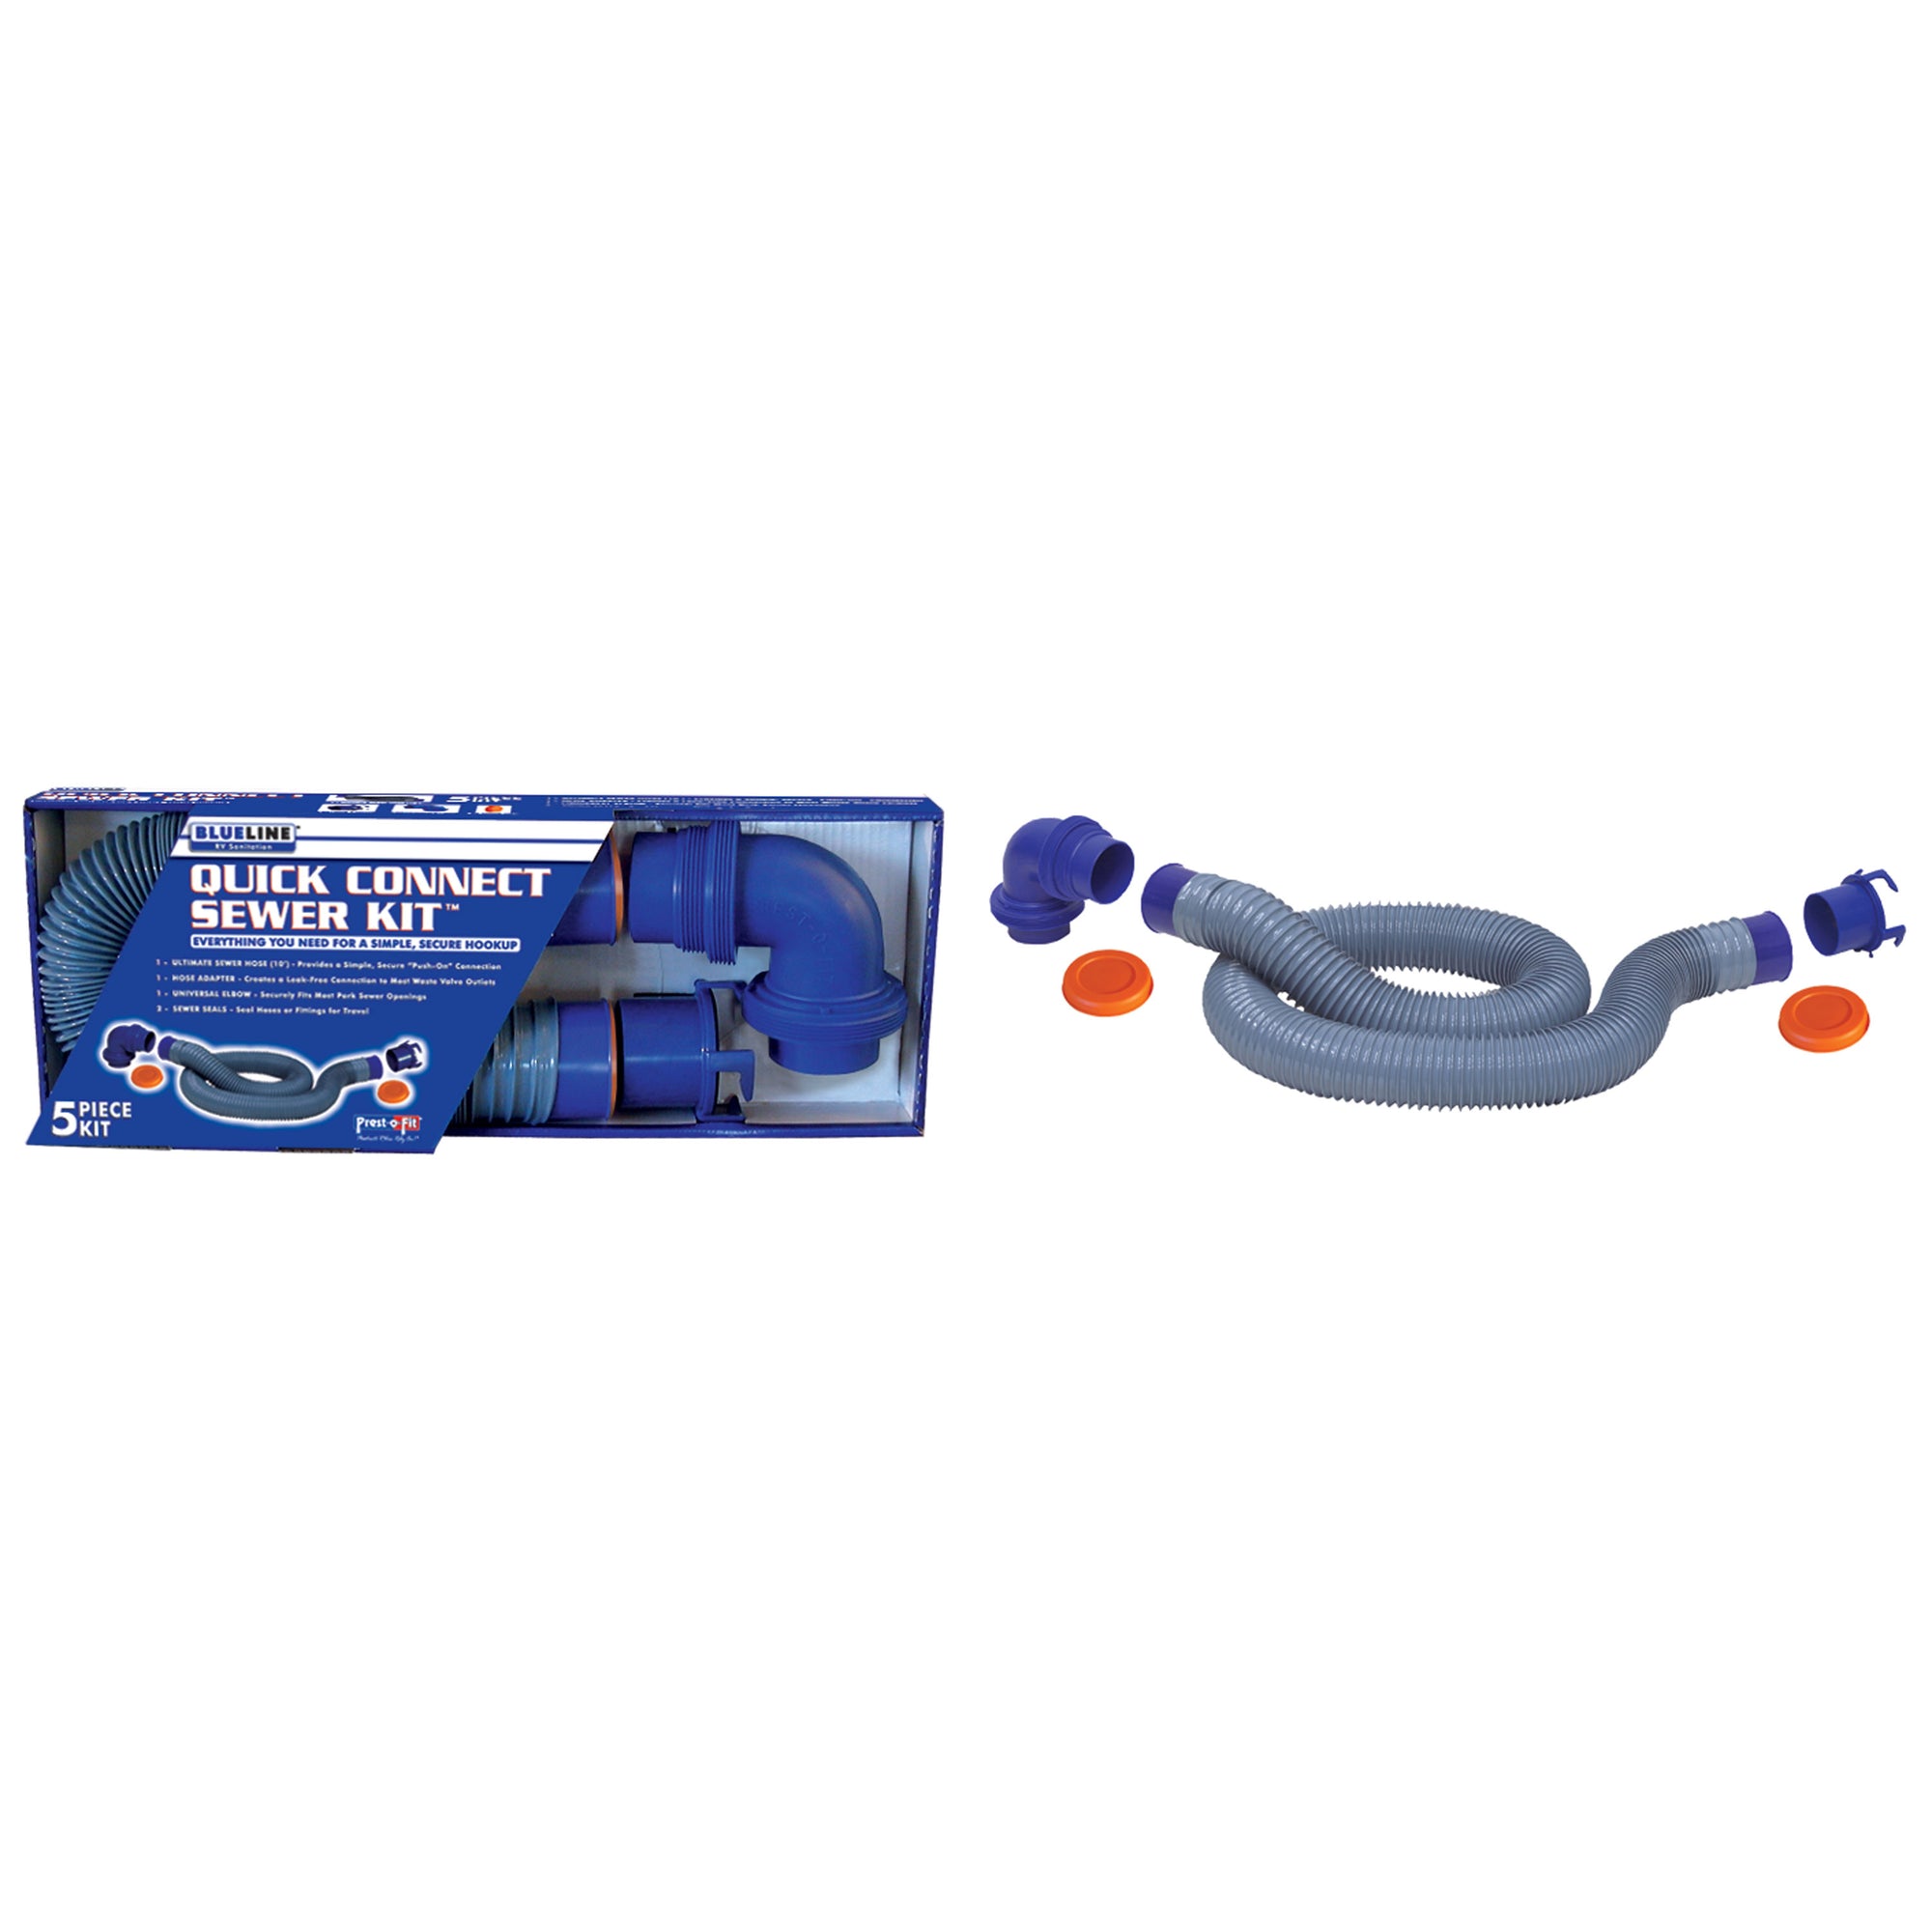 Prest-O-Fit 1-0202 Blueline Quick Connect Sewer Kit